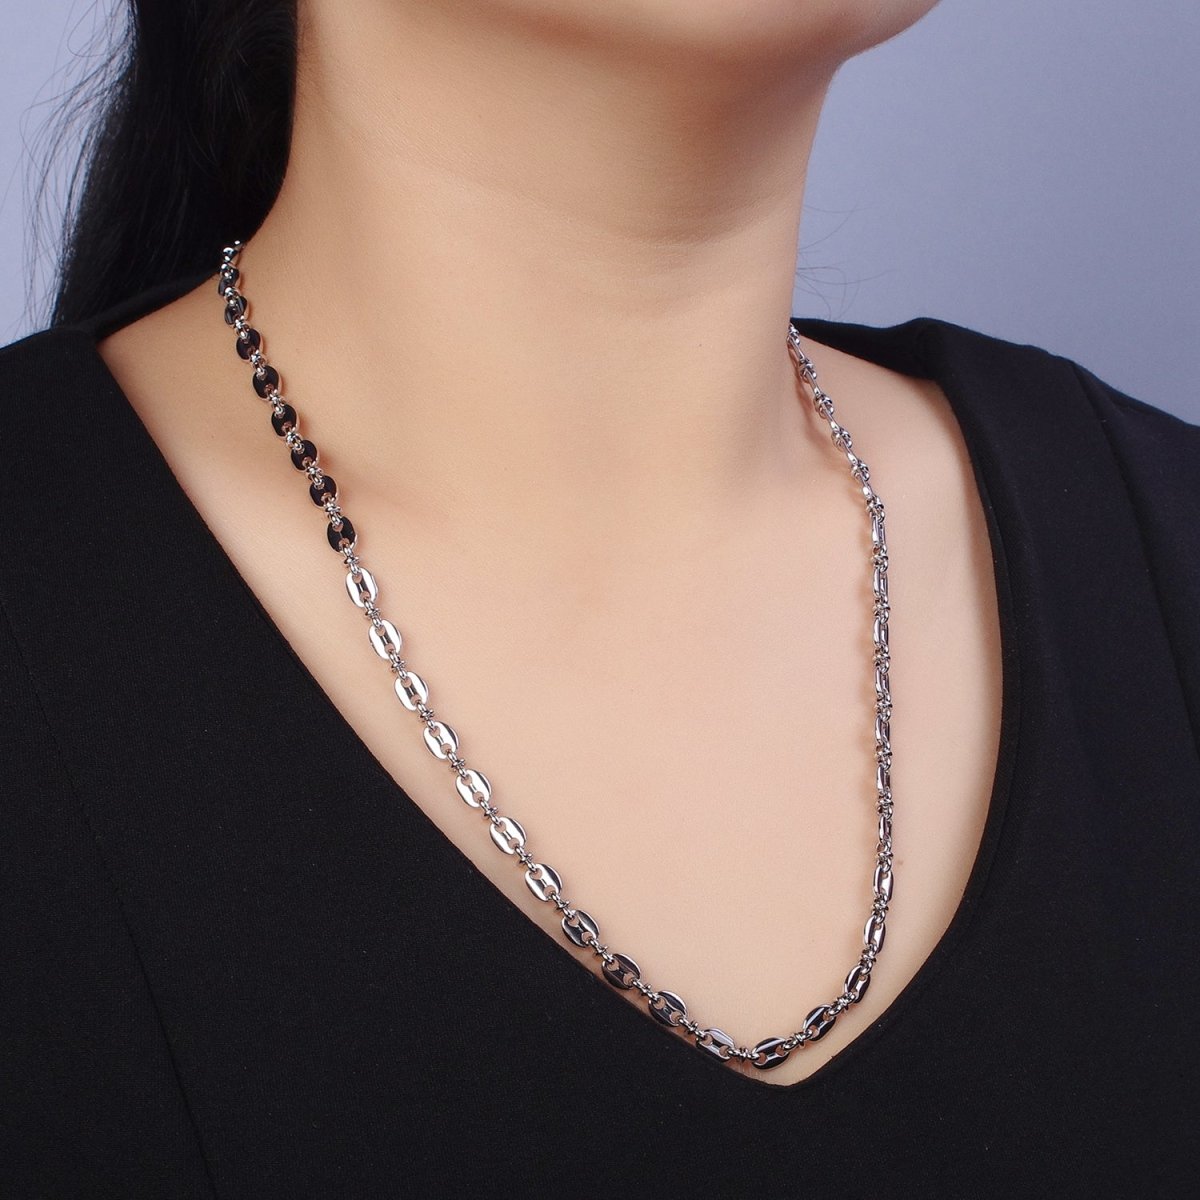 6mm Silver Anchor Mariner Link Chain Necklace Long Necklace Statement Unisex Chain Necklace, Gift For Him or Her | WA-1595 Clearance Pricing - DLUXCA